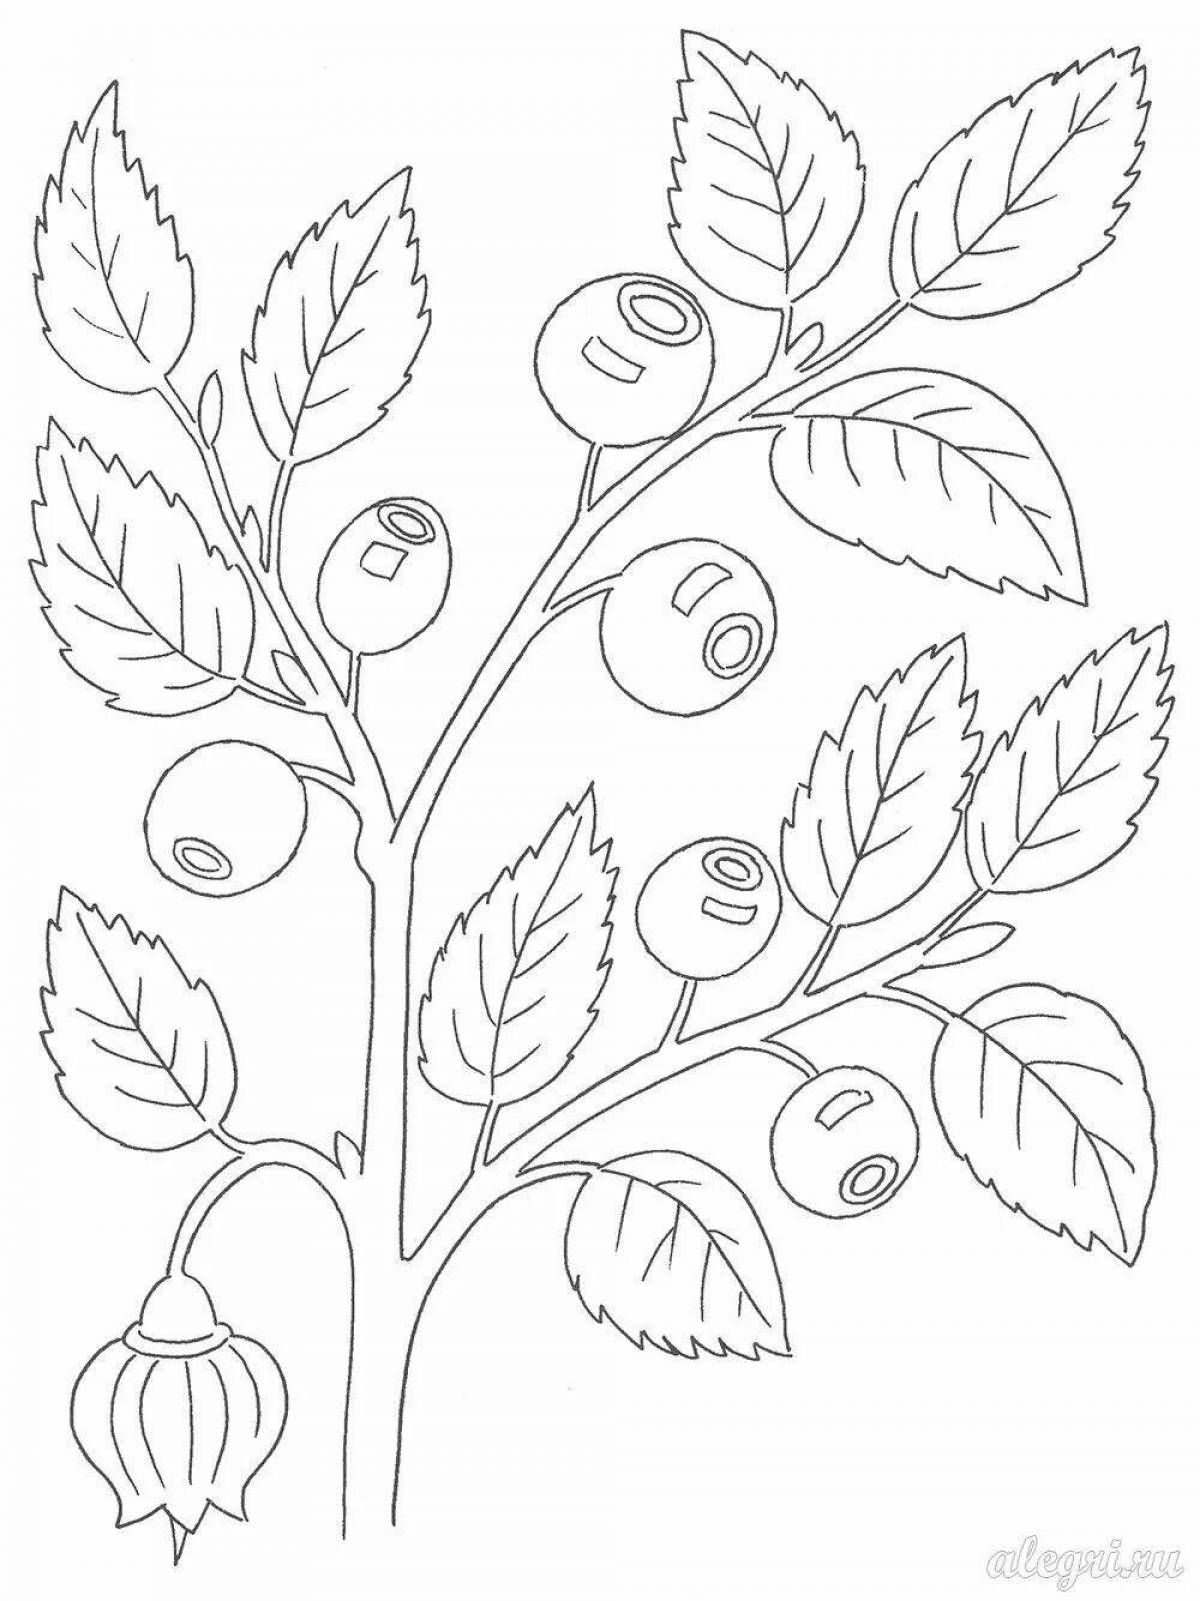 Glowing blueberry coloring book for kids